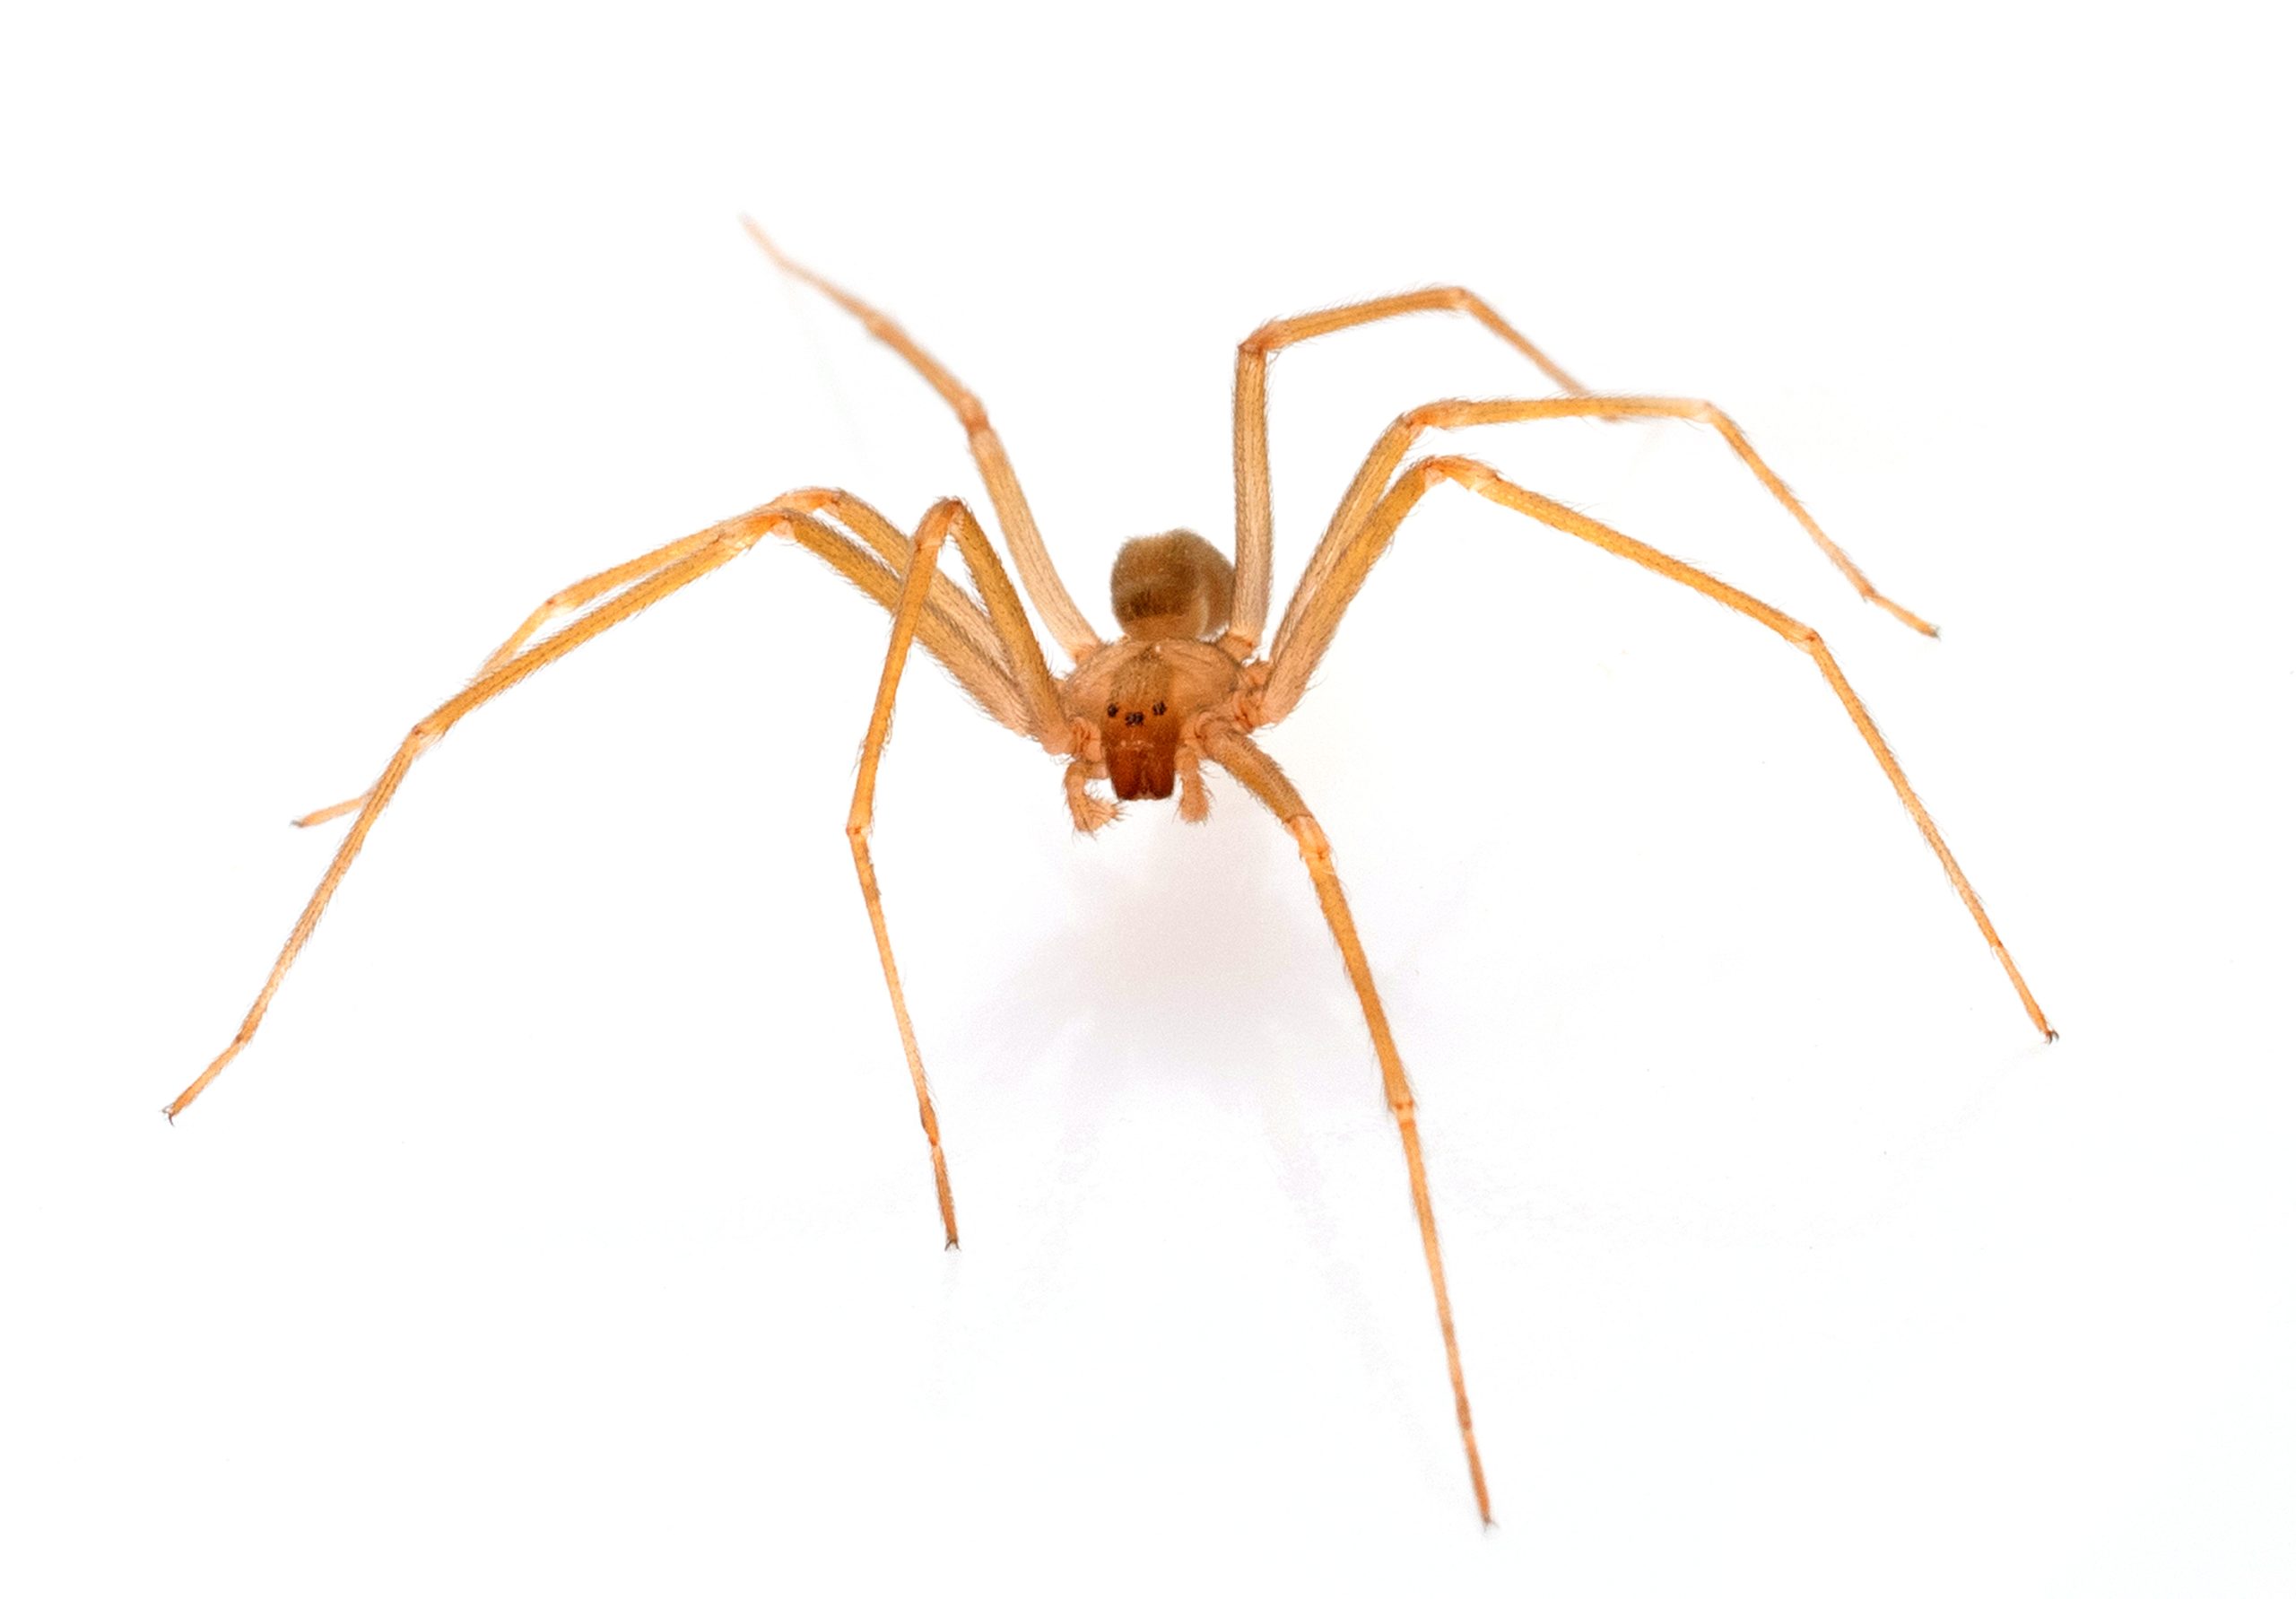 Spider over a white background